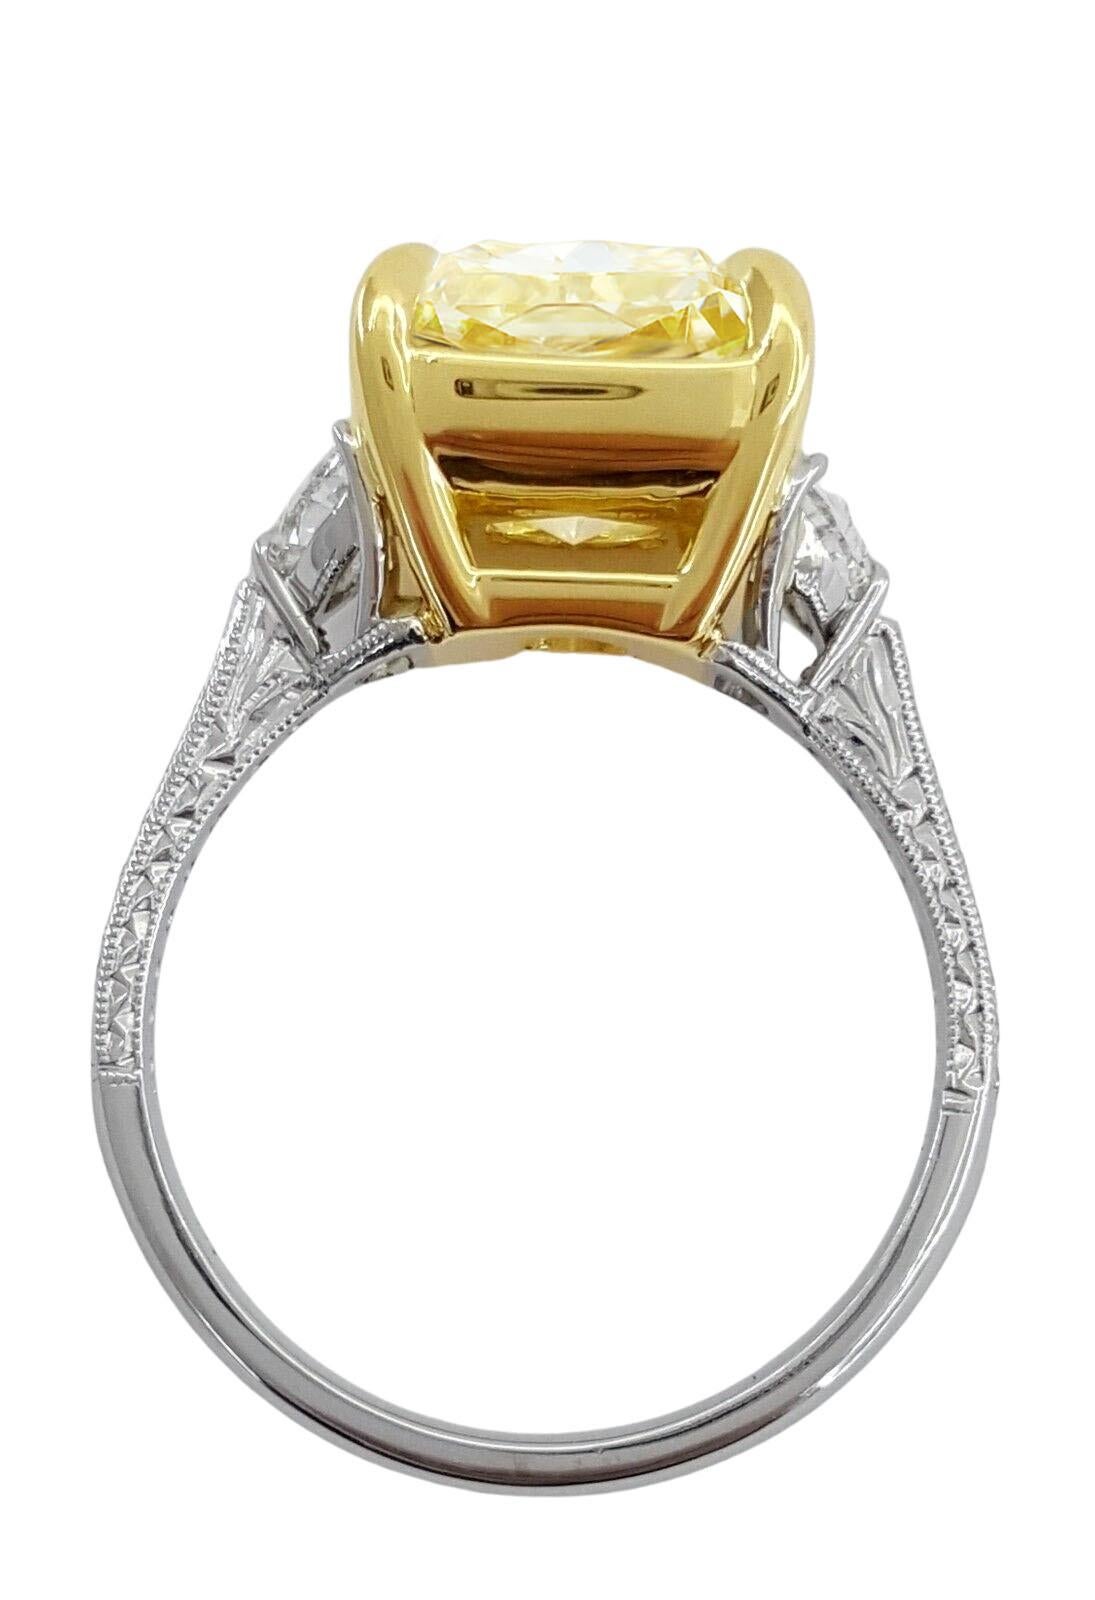 An exquisite  5 carat Cushion Brilliant Cut Natural Yellow Diamond Three Stone Engagement Ring in Platinum & 18K Yellow Gold. 


